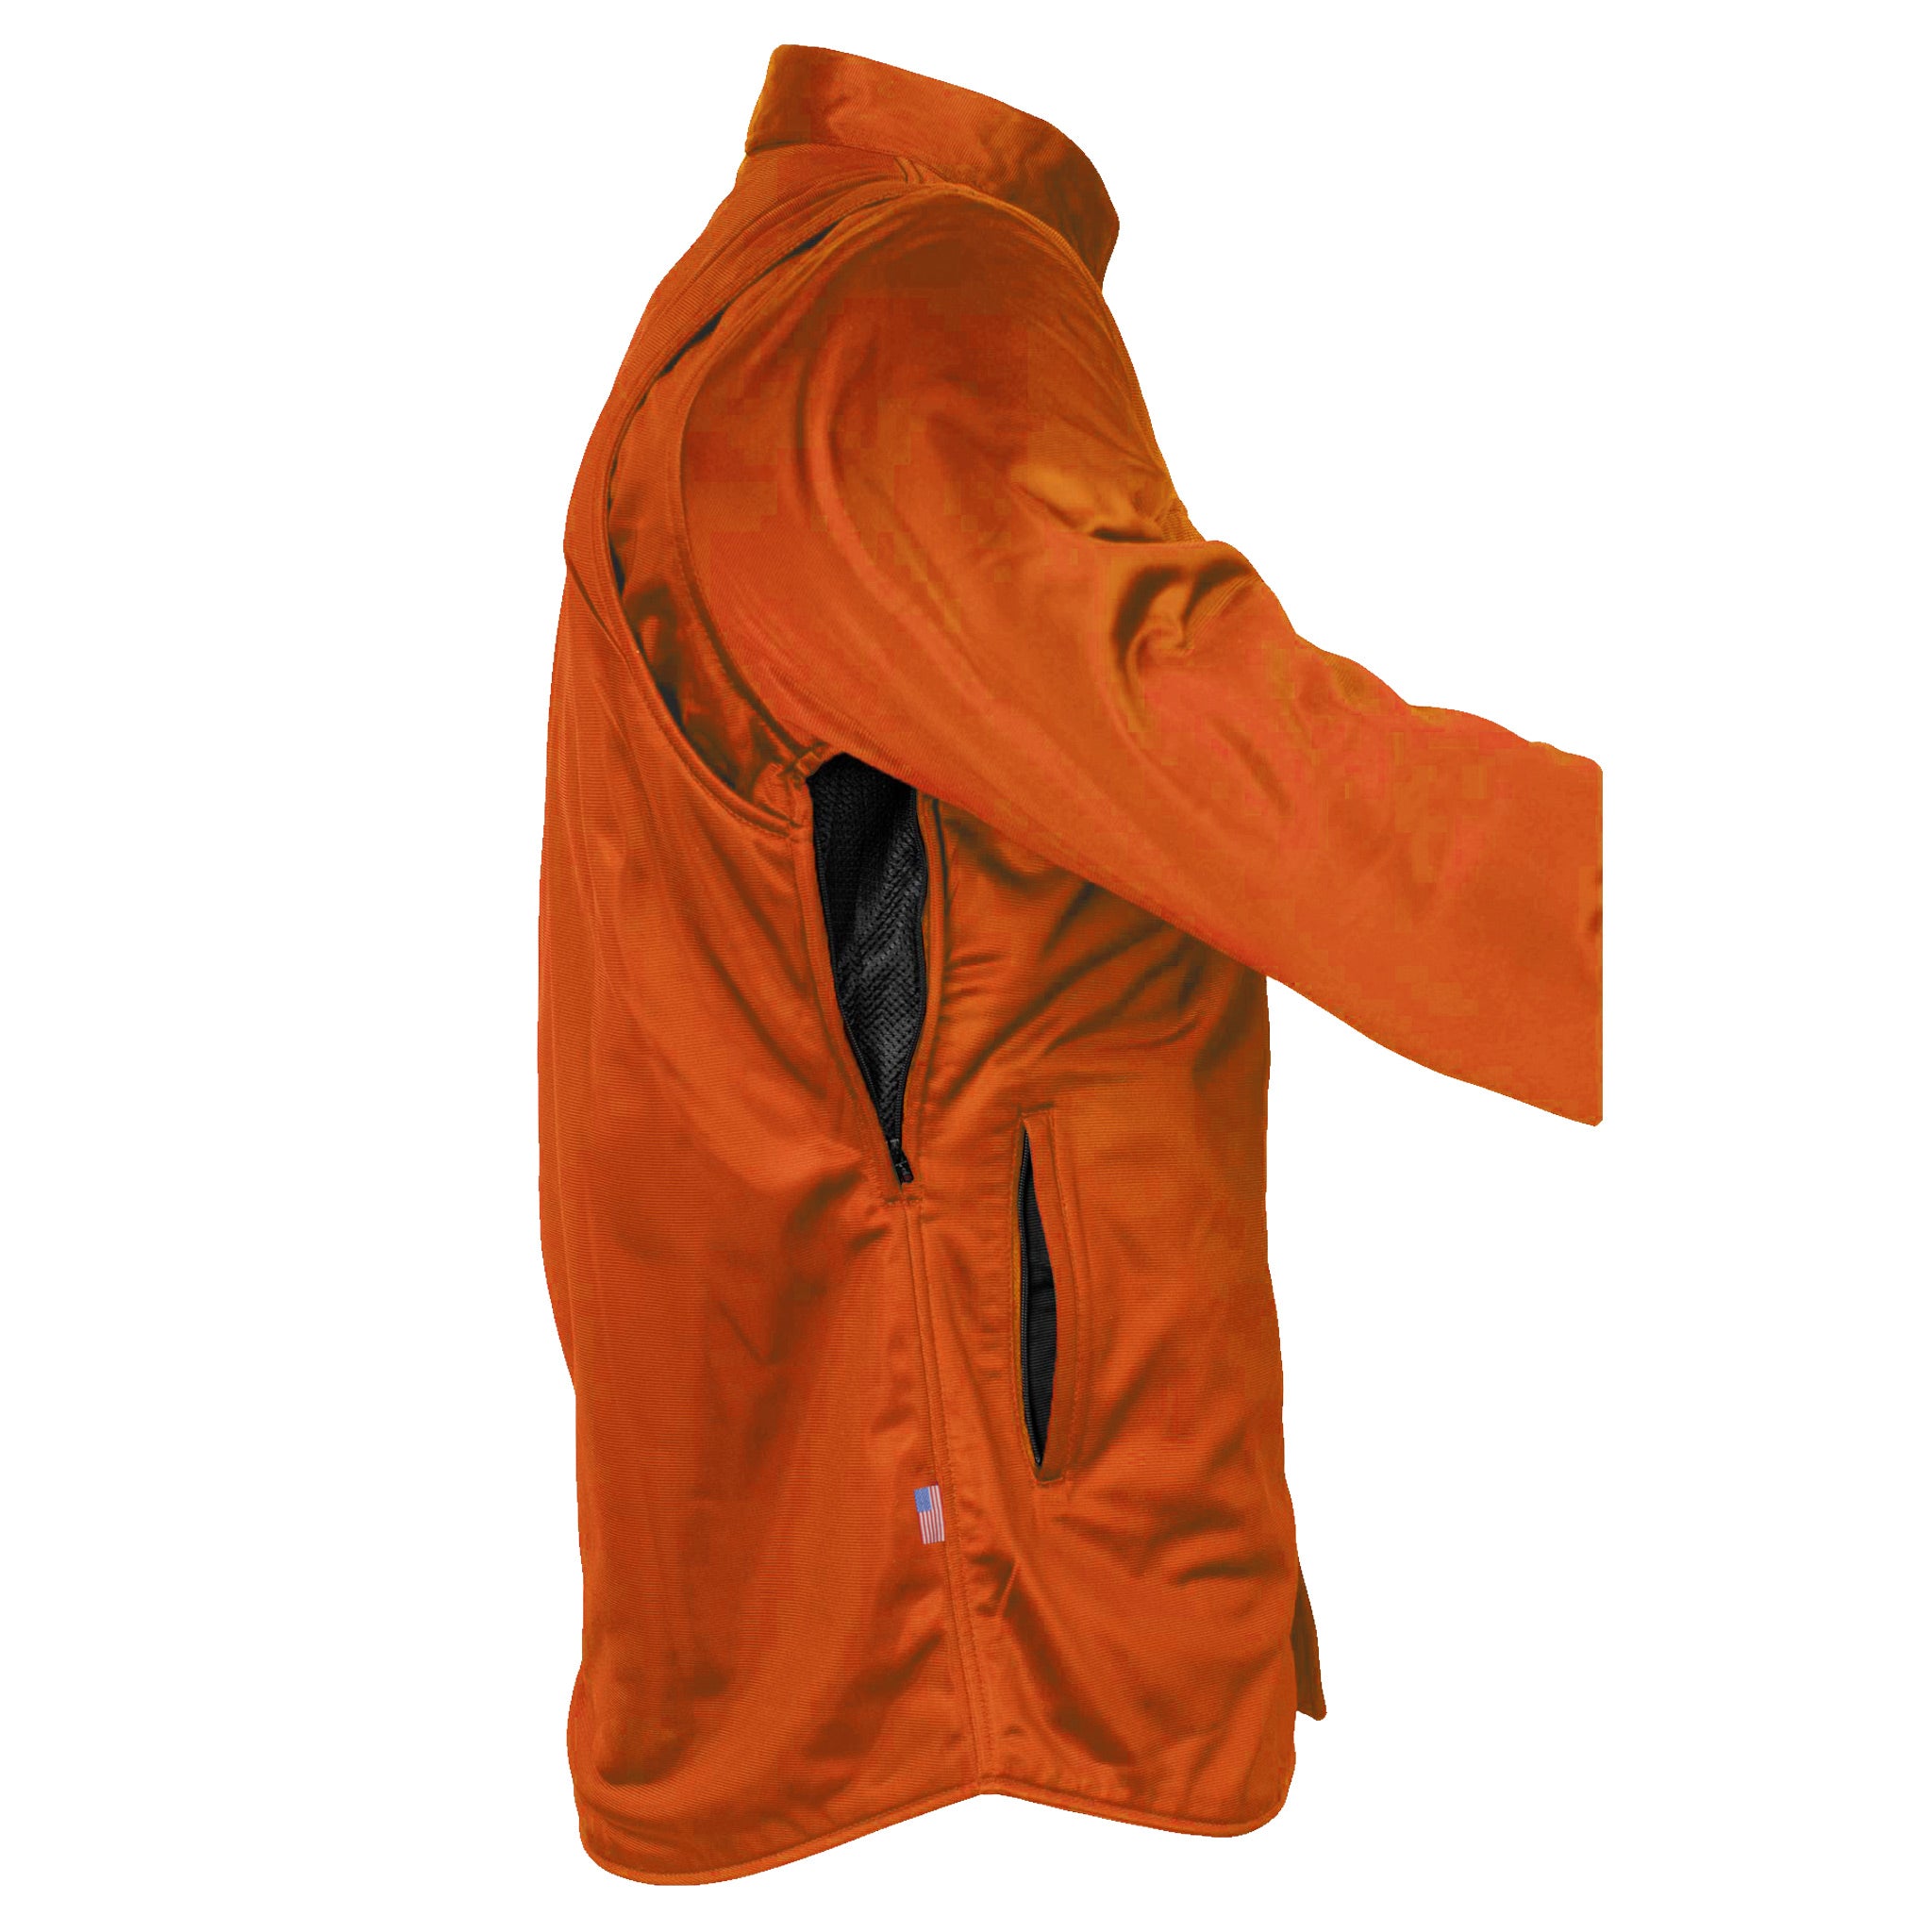 Ultra-Protective-Shirt-For-Men-Orange-Solid-Right-Raised-Up-Sleeve